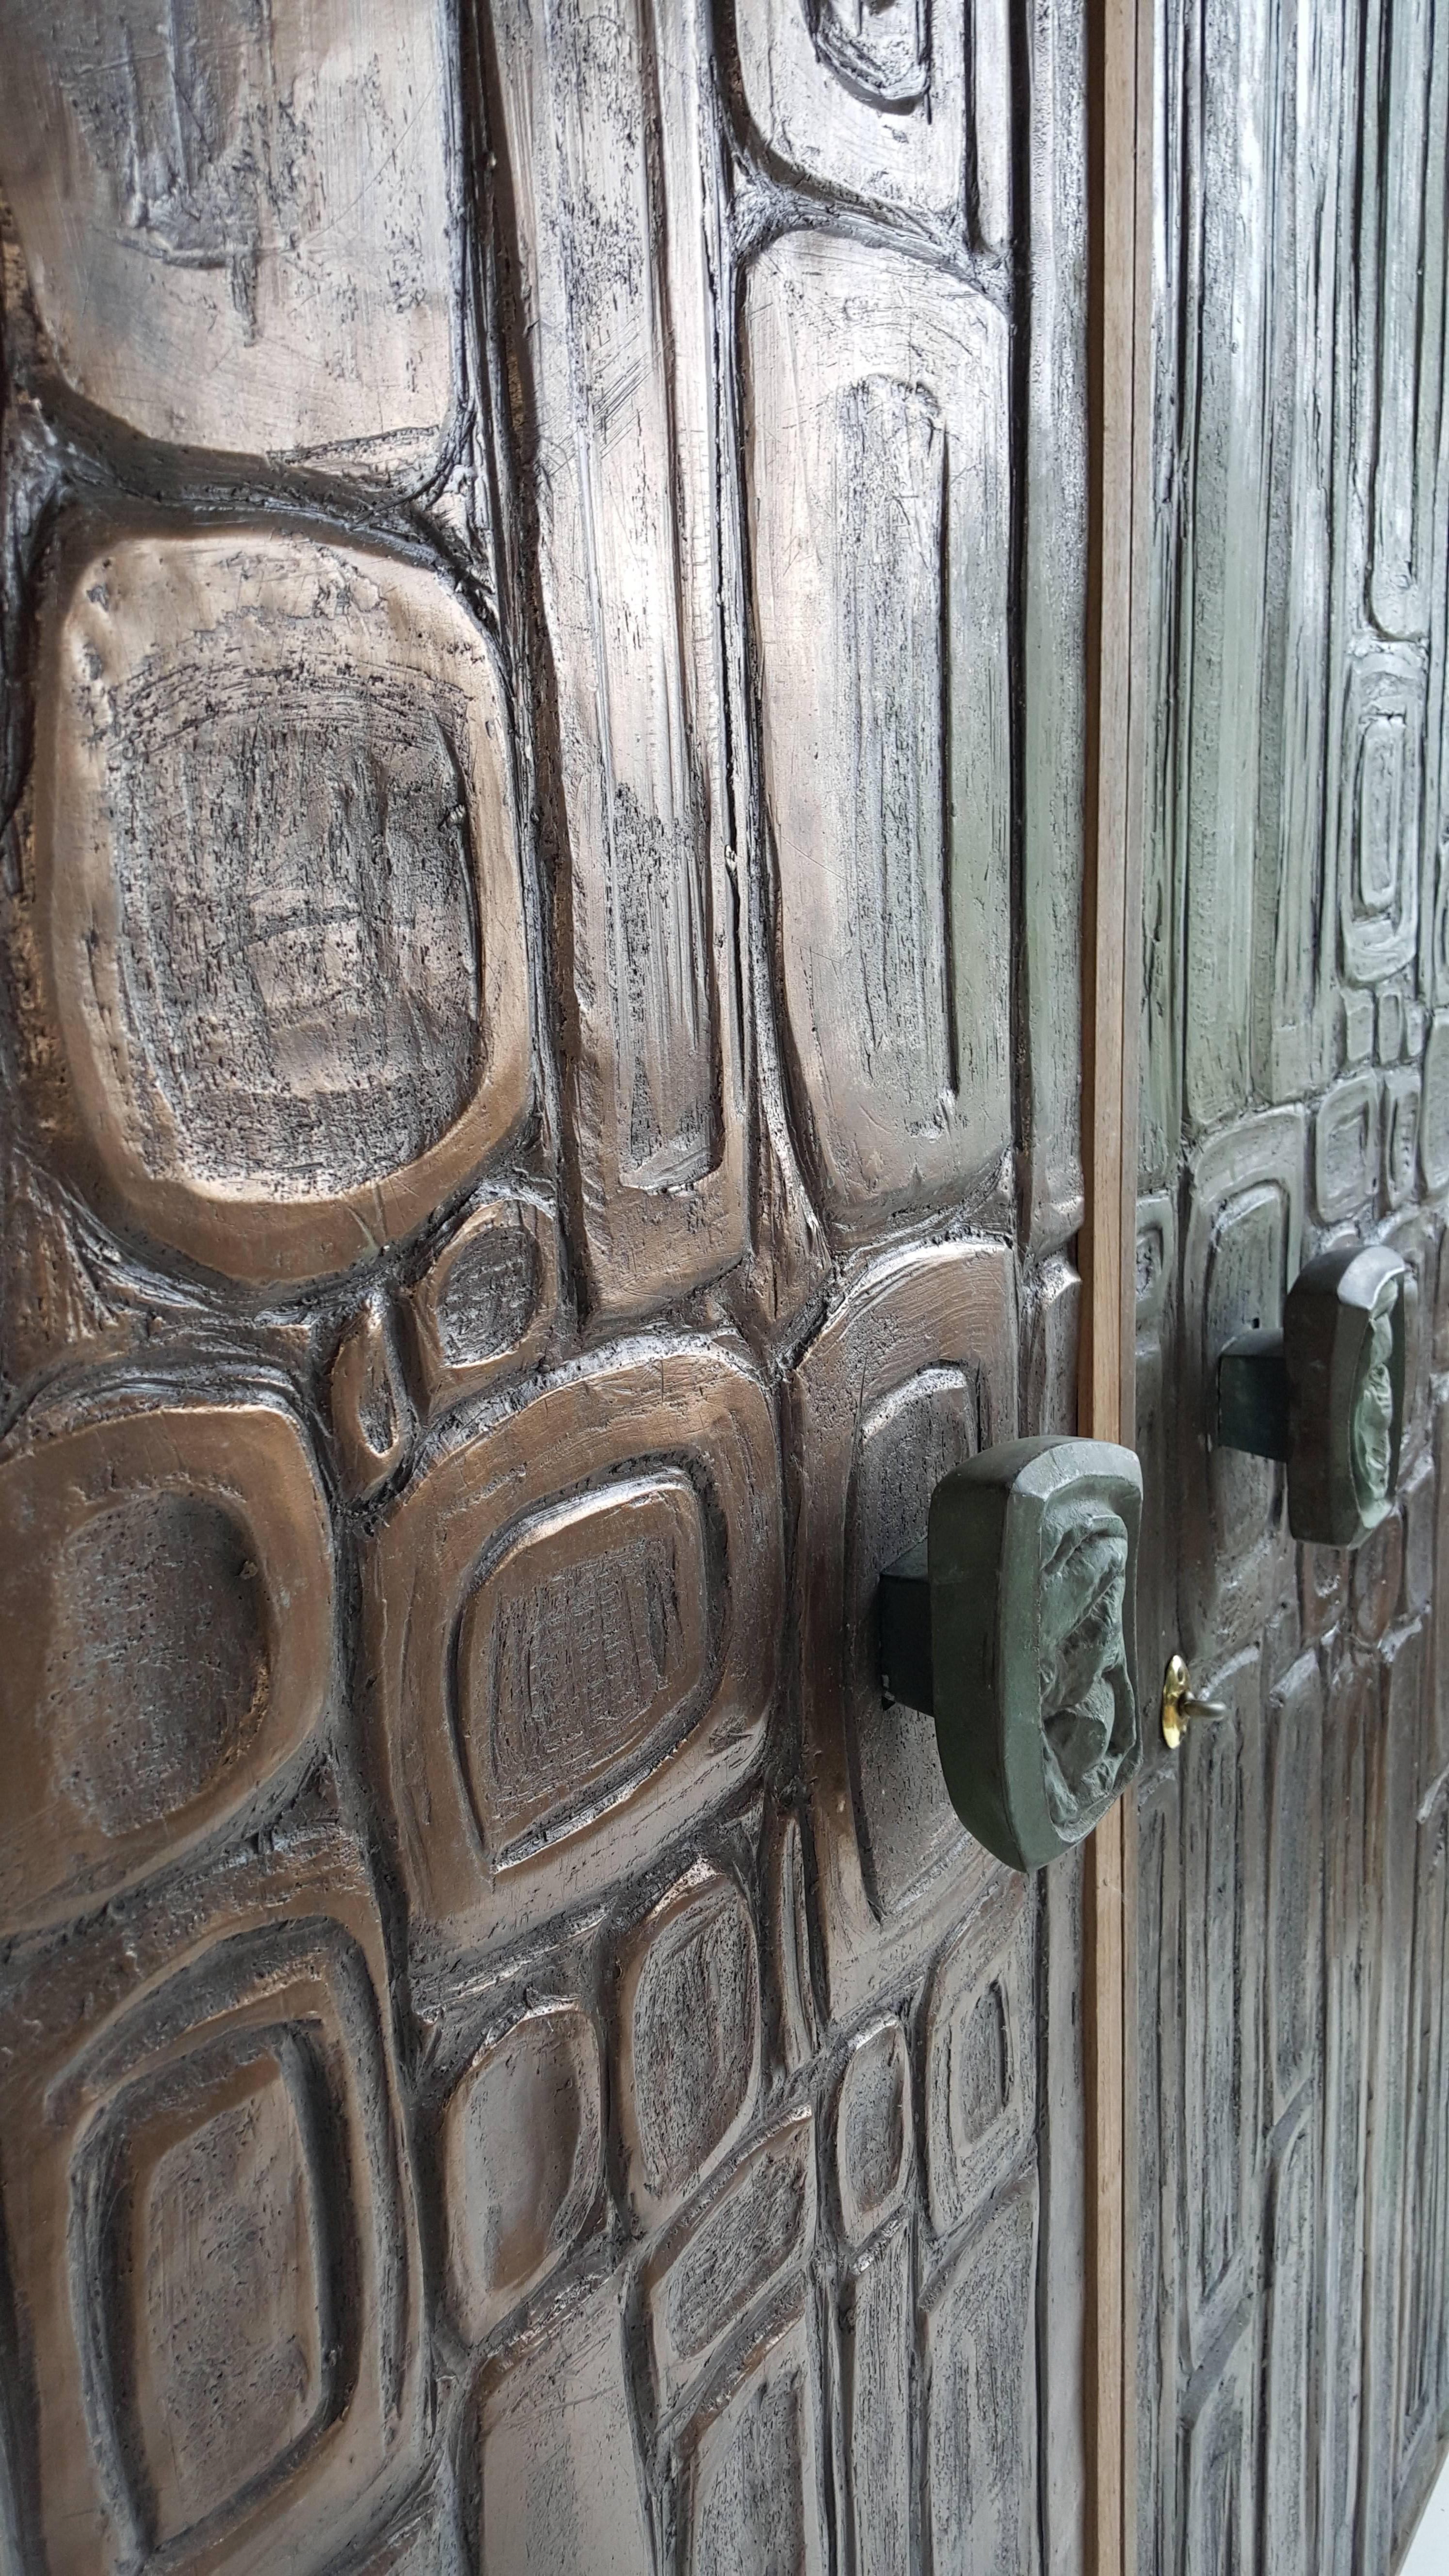 Unique sculptural doors in the style of McCarrol and Gillespie known for the 